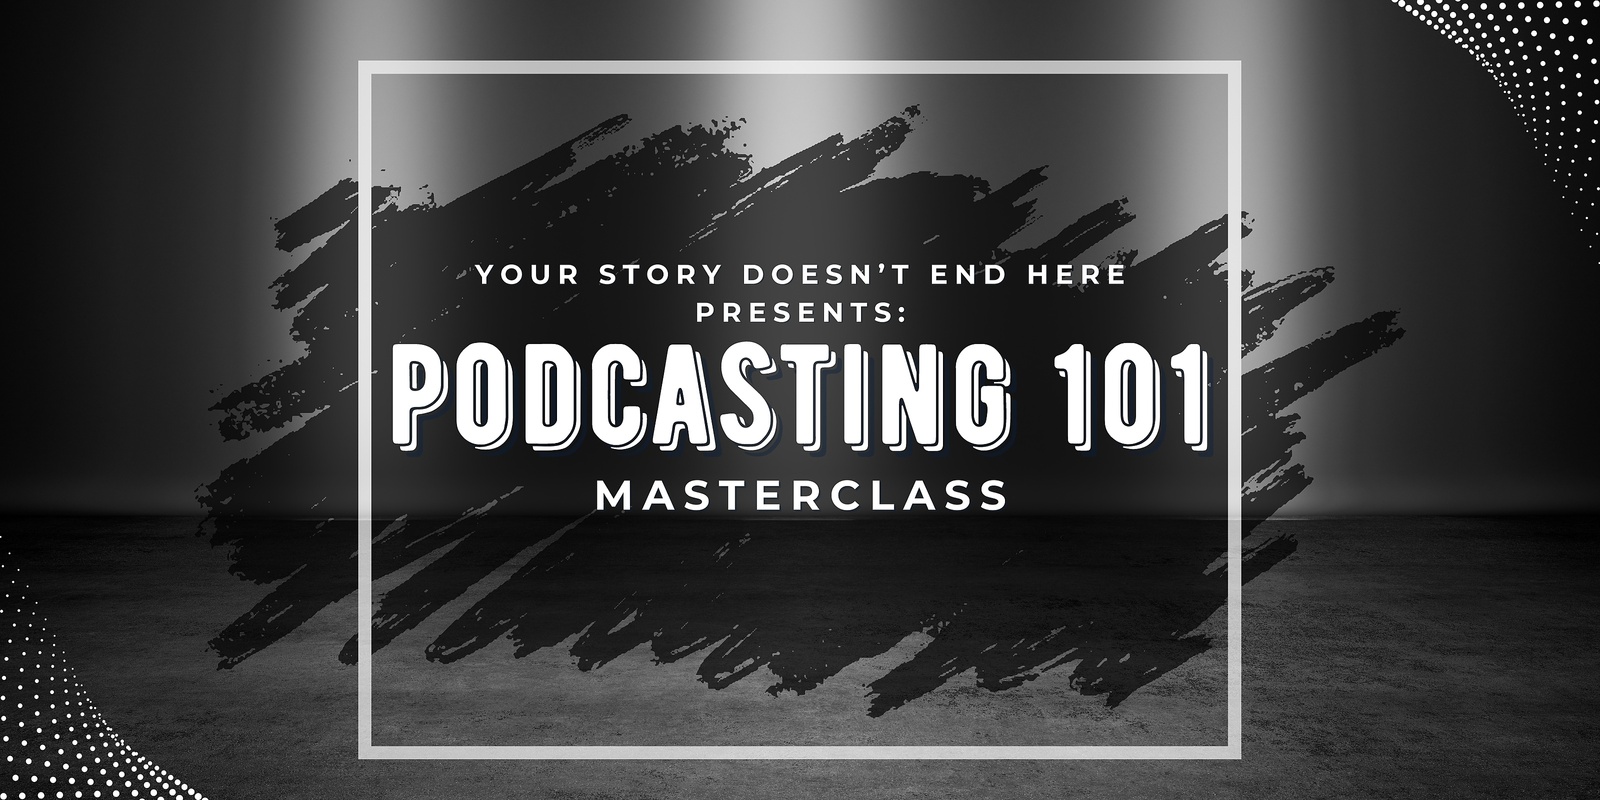 Banner image for Podcasting 101 Masterclass